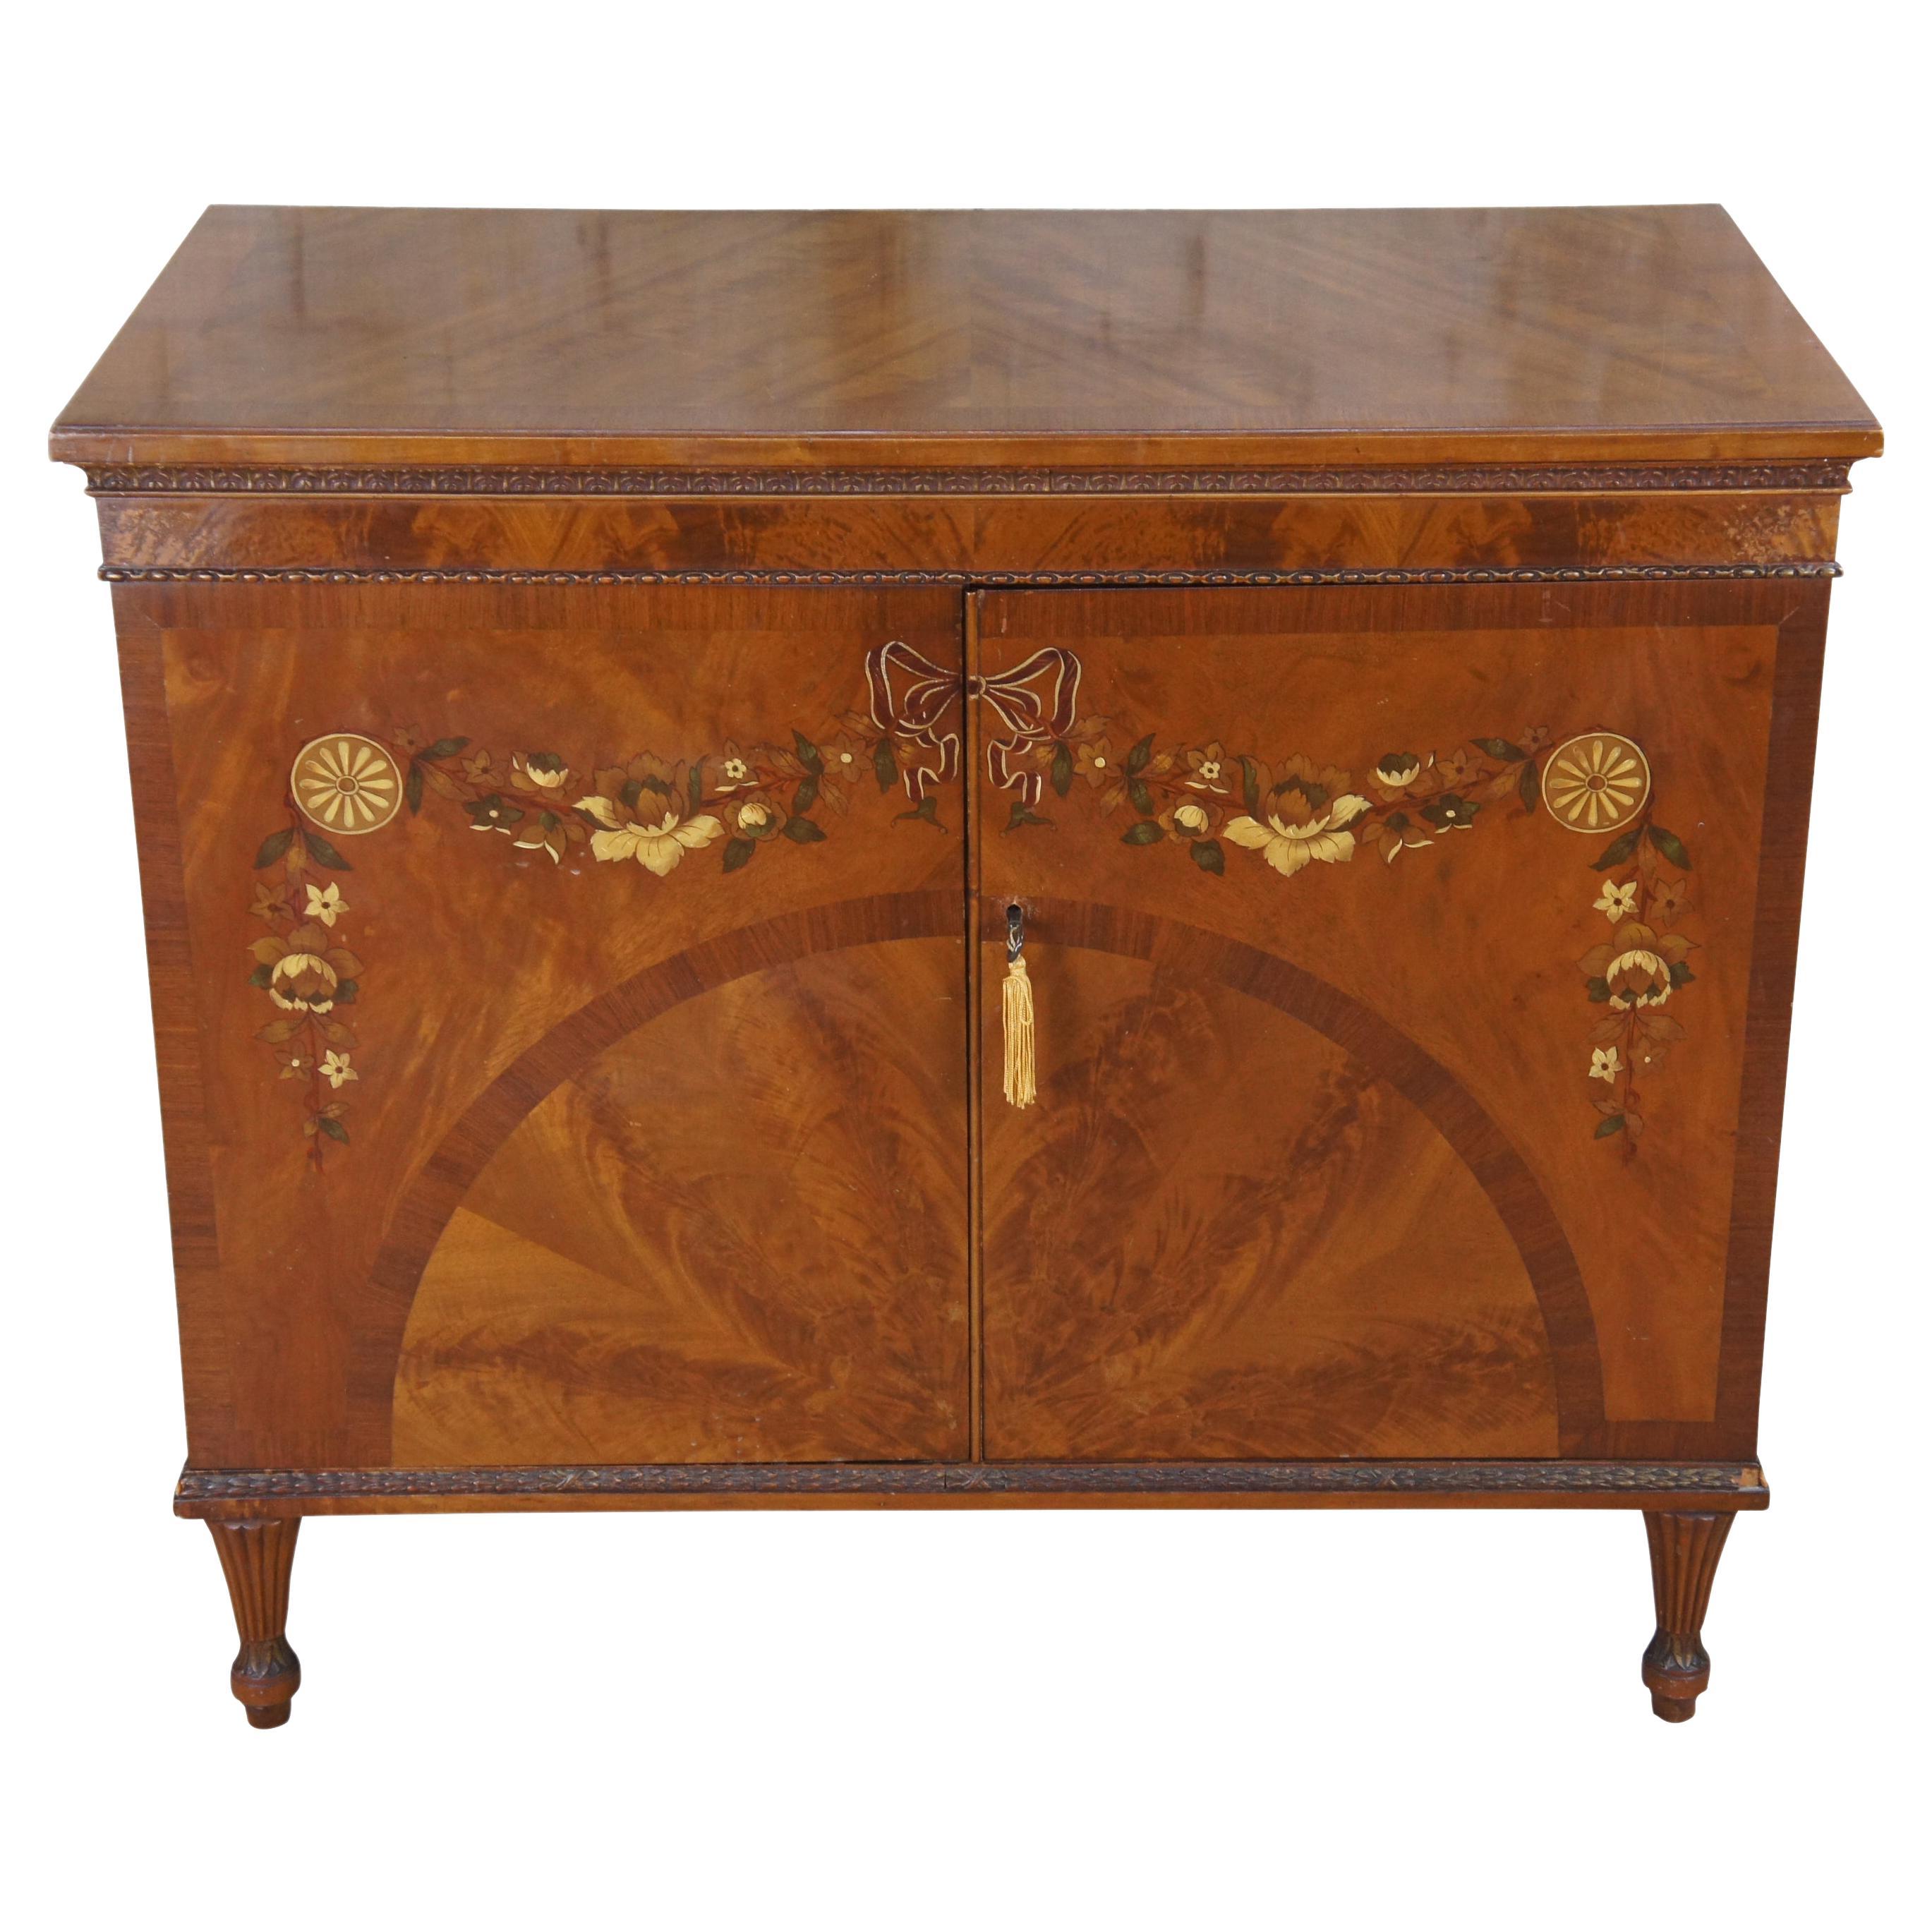 Antique Art Deco Neoclassical Satinwood Buffet Cabinet Sideboard Console 40" For Sale